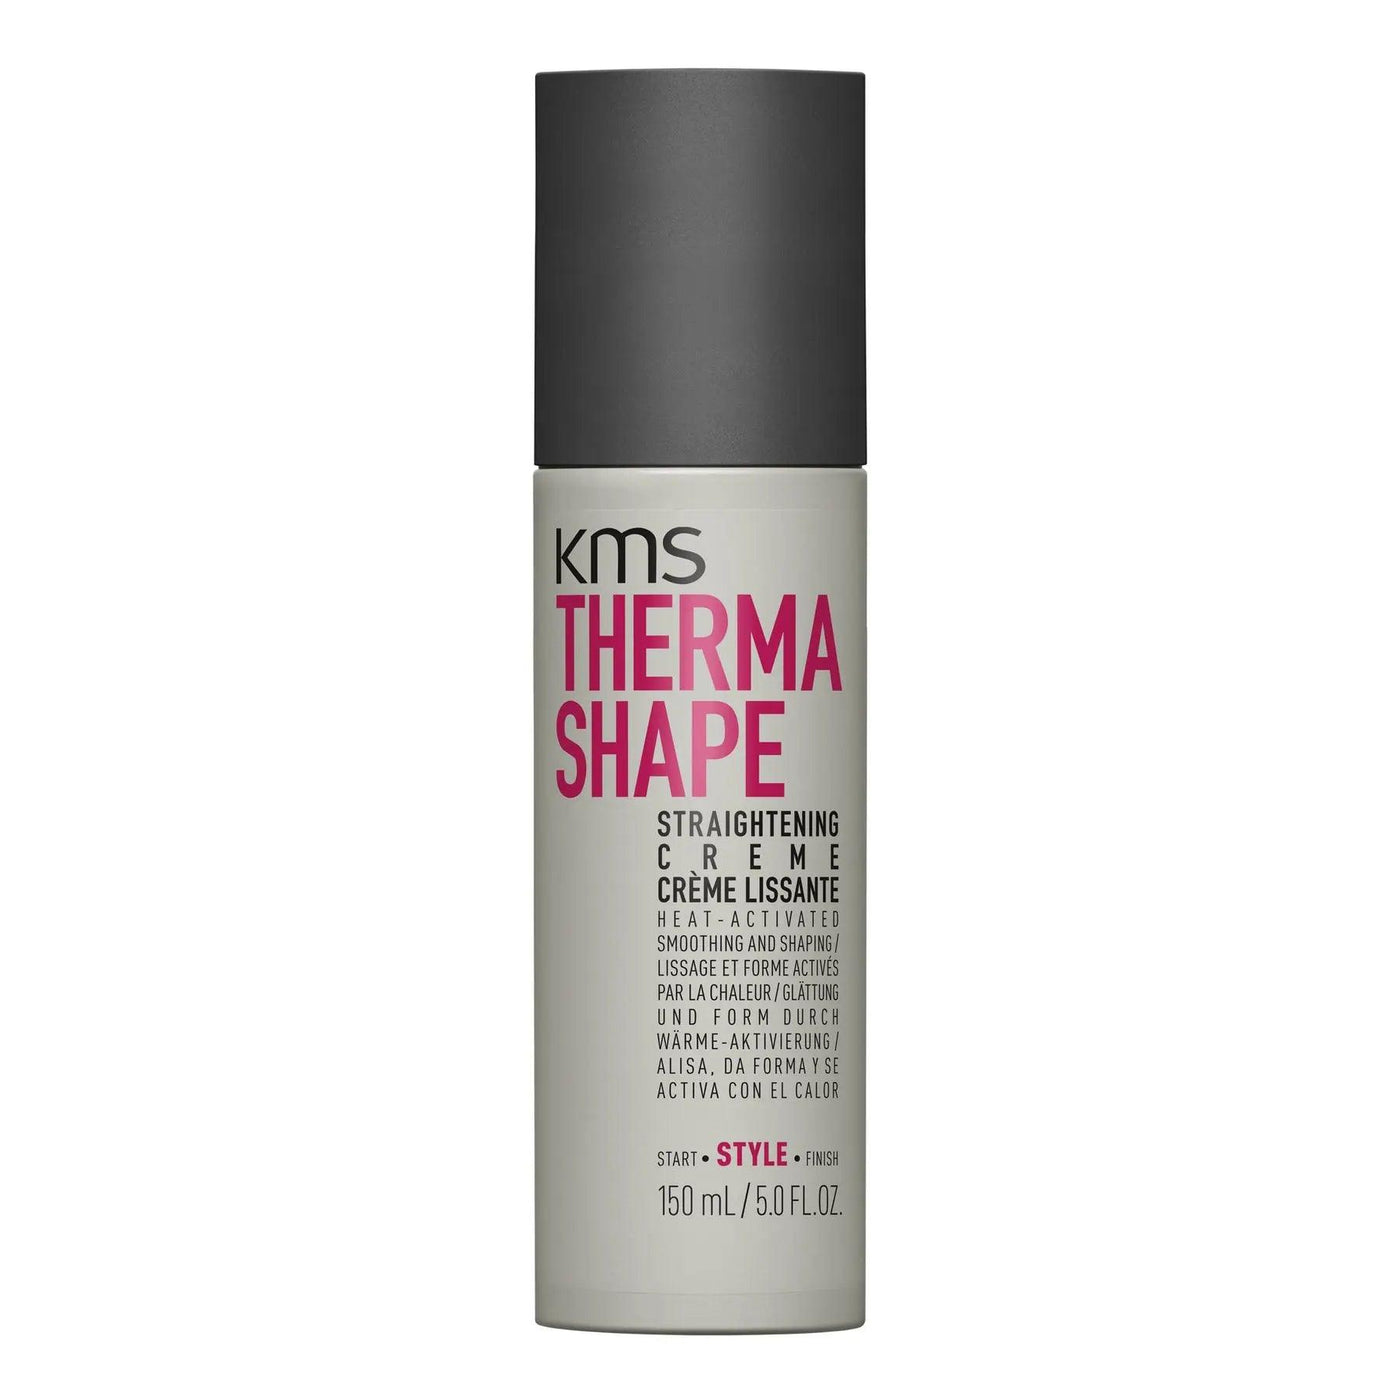 Kms Thermashape Straightening Creme 150ml KMS Boutique Deauville